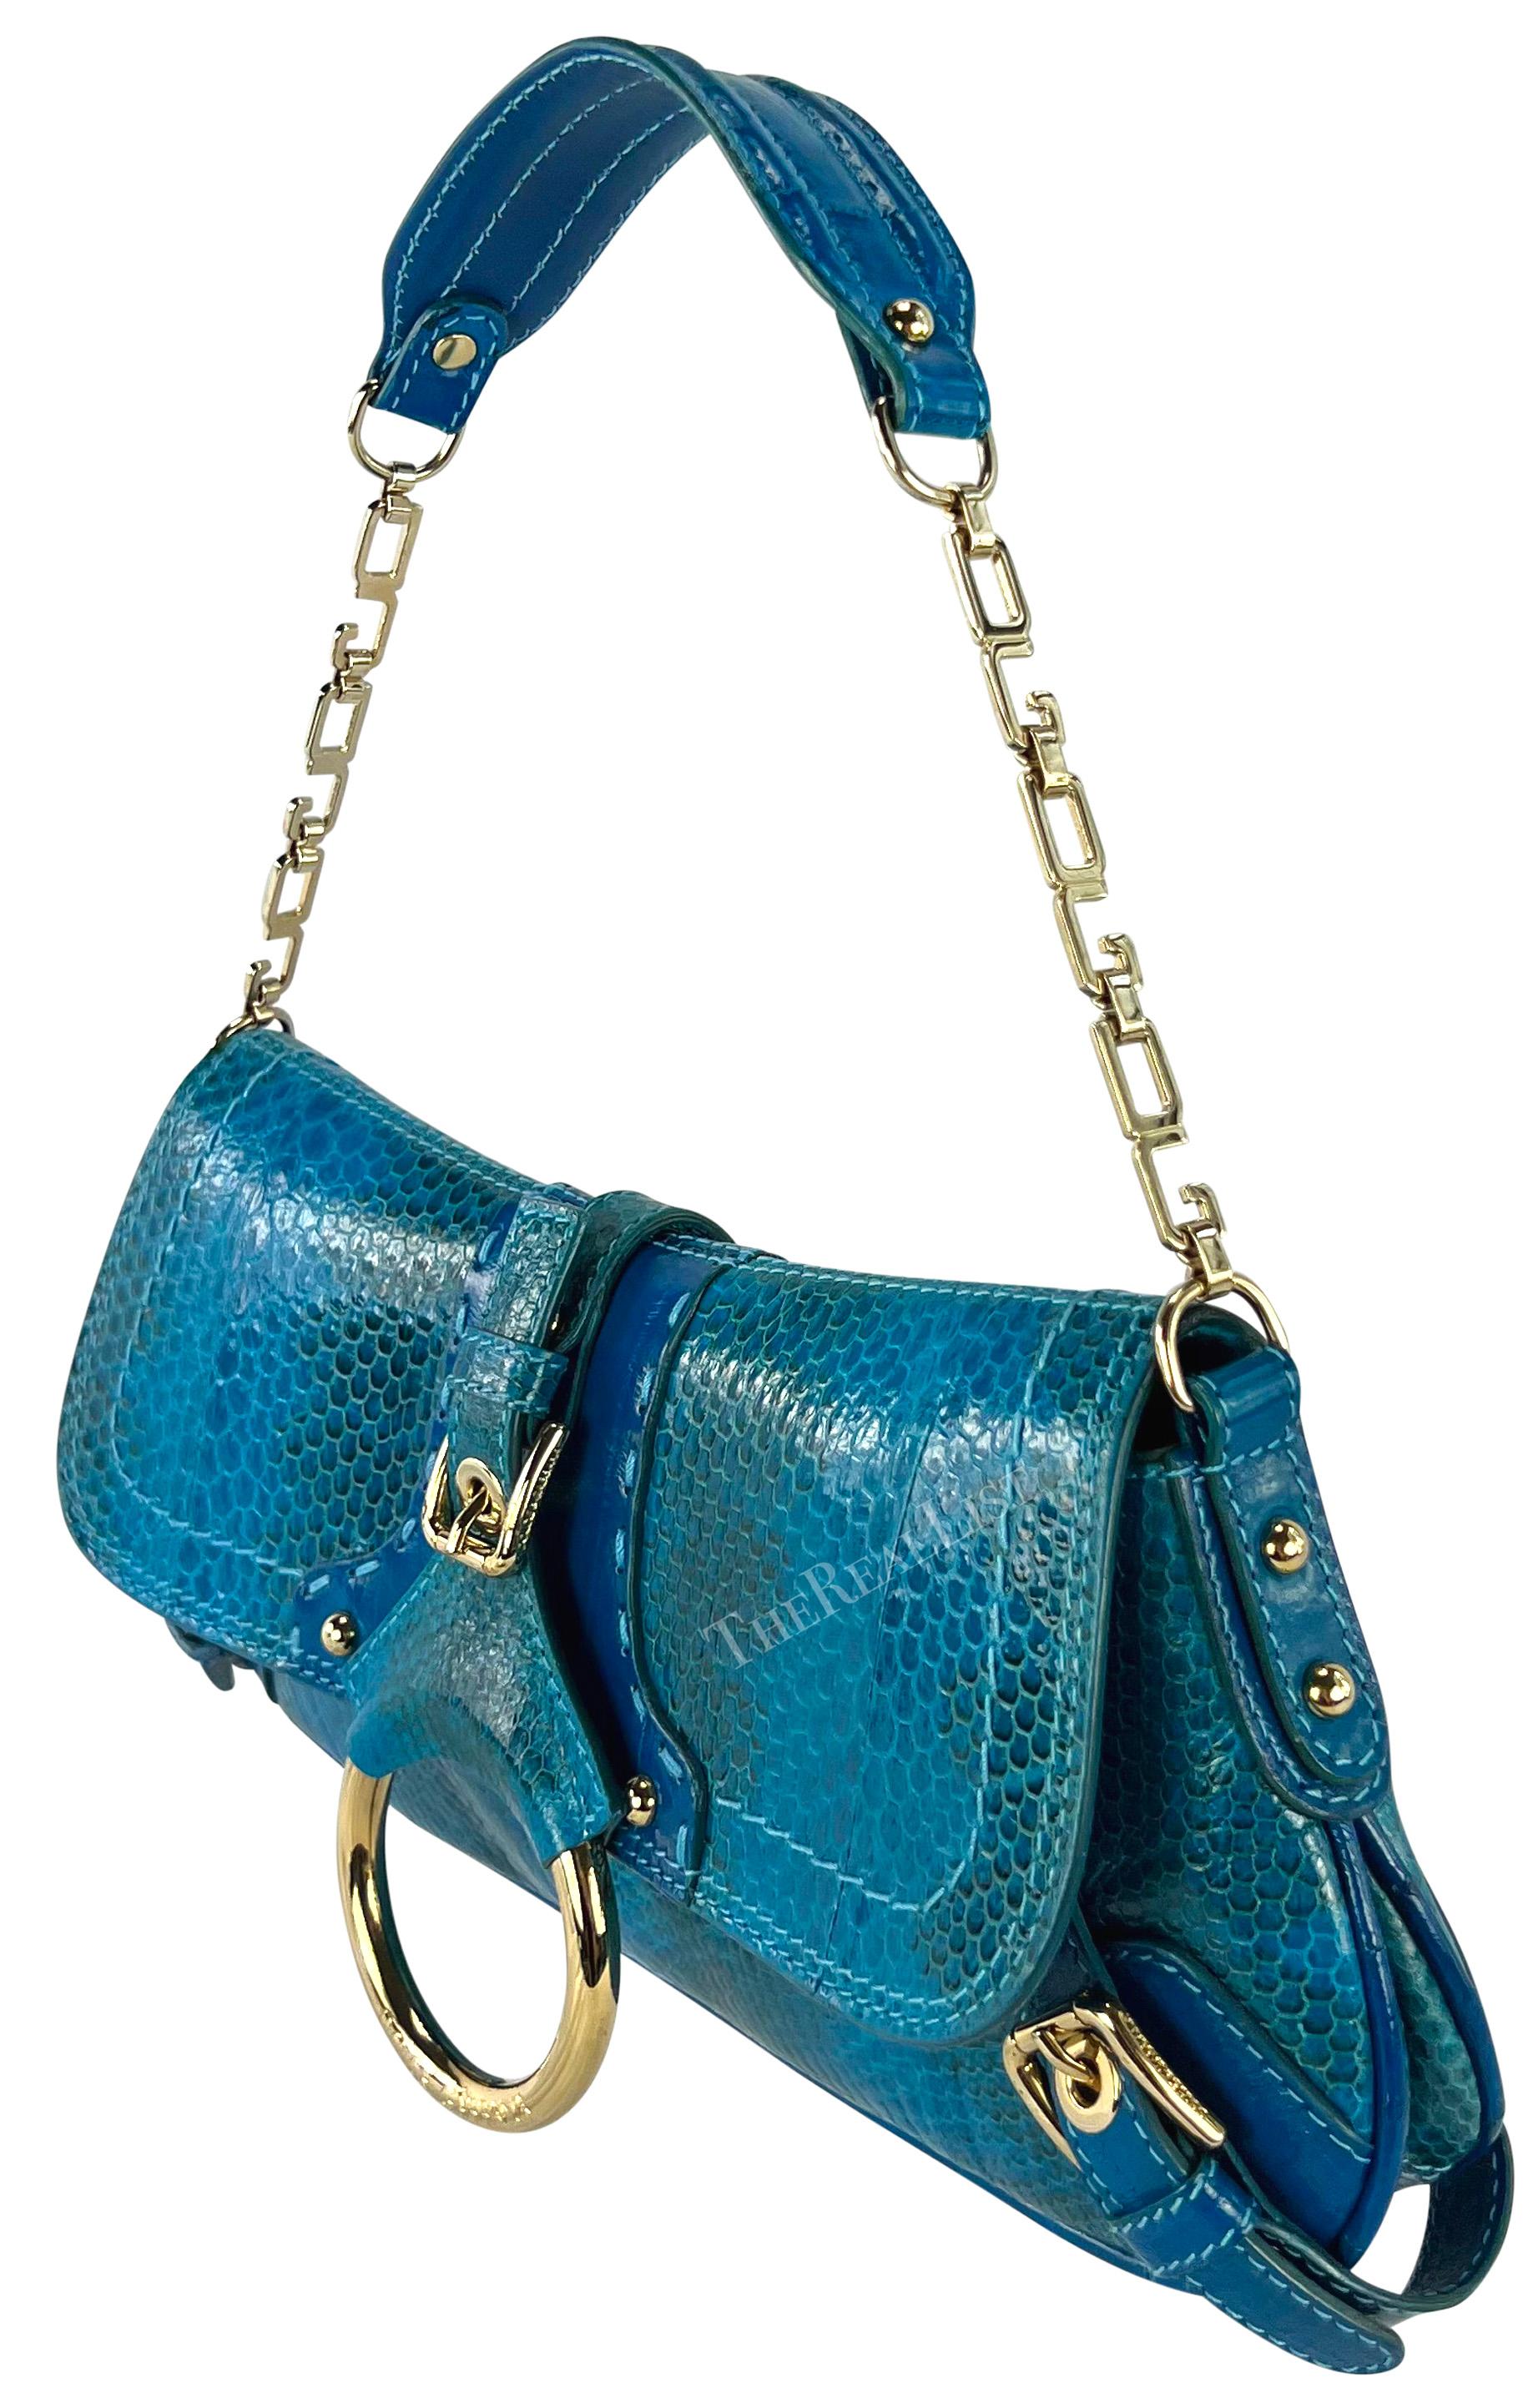 From the Fall/Winter 2004 collection, this fabulous bright blue python embossed Dolce & Gabbana shoulder bag is constructed primarily of vibrant blue python skin with blue eel skin accents. This flap bag features gold-tone hardware with a 'DG' chain